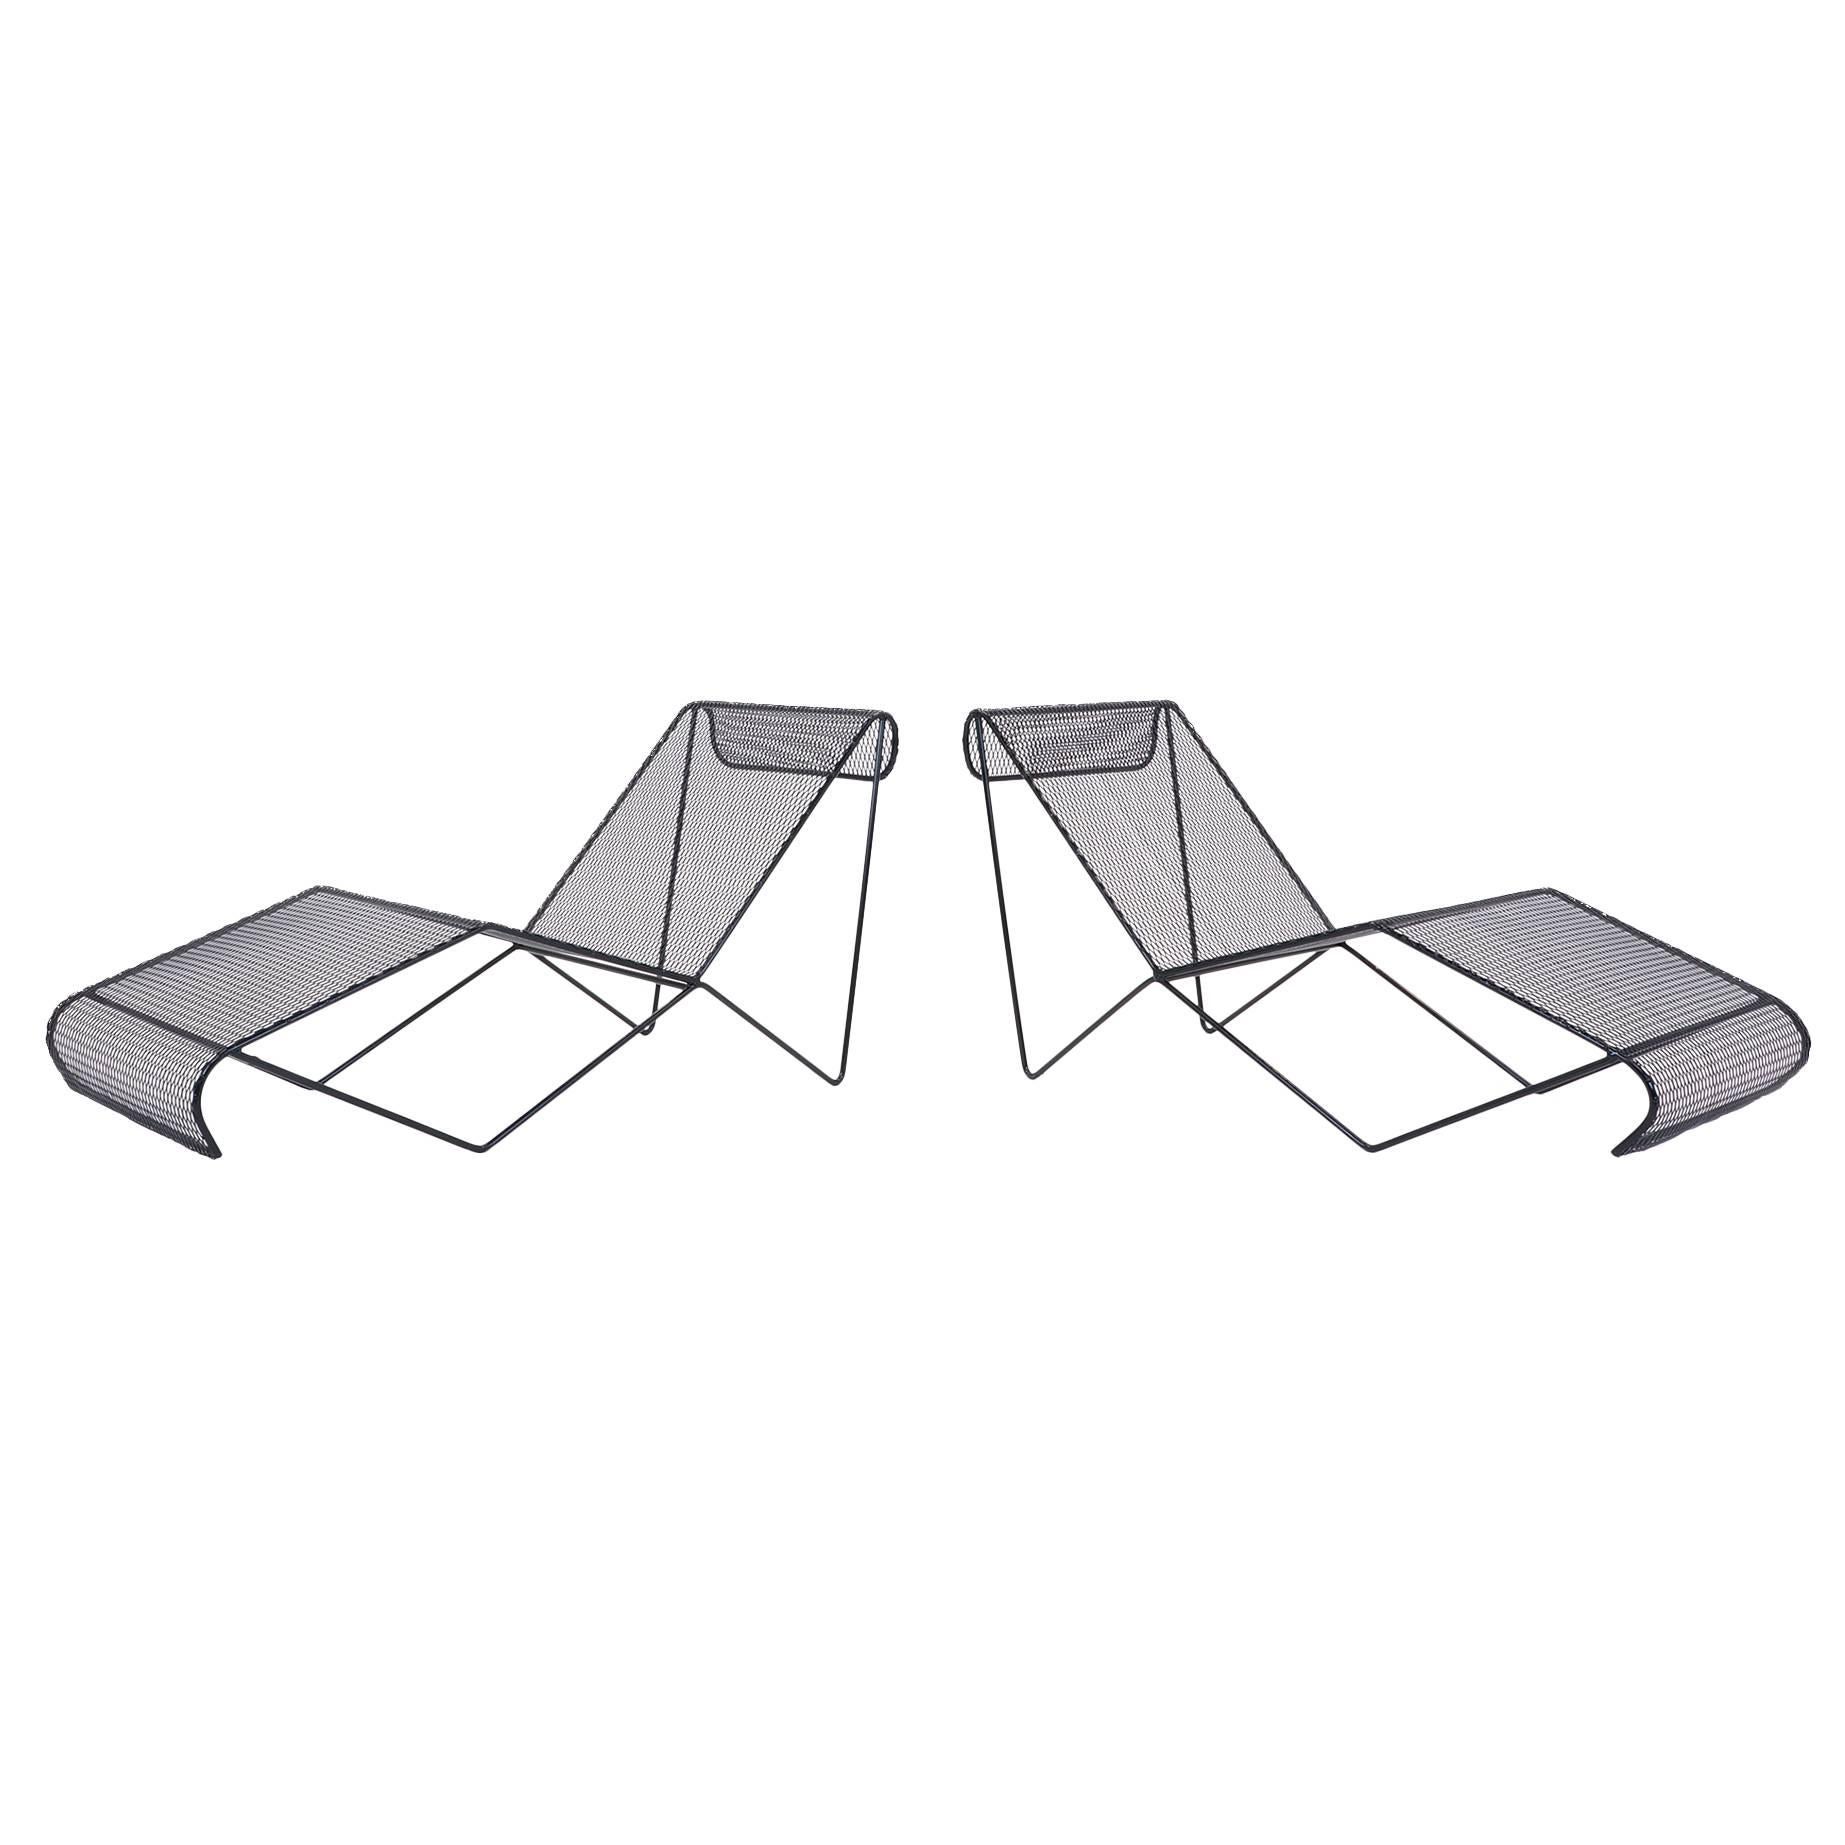 Pair of Outdoor Chaise Lounge Chairs Attributed to Milo Baughman